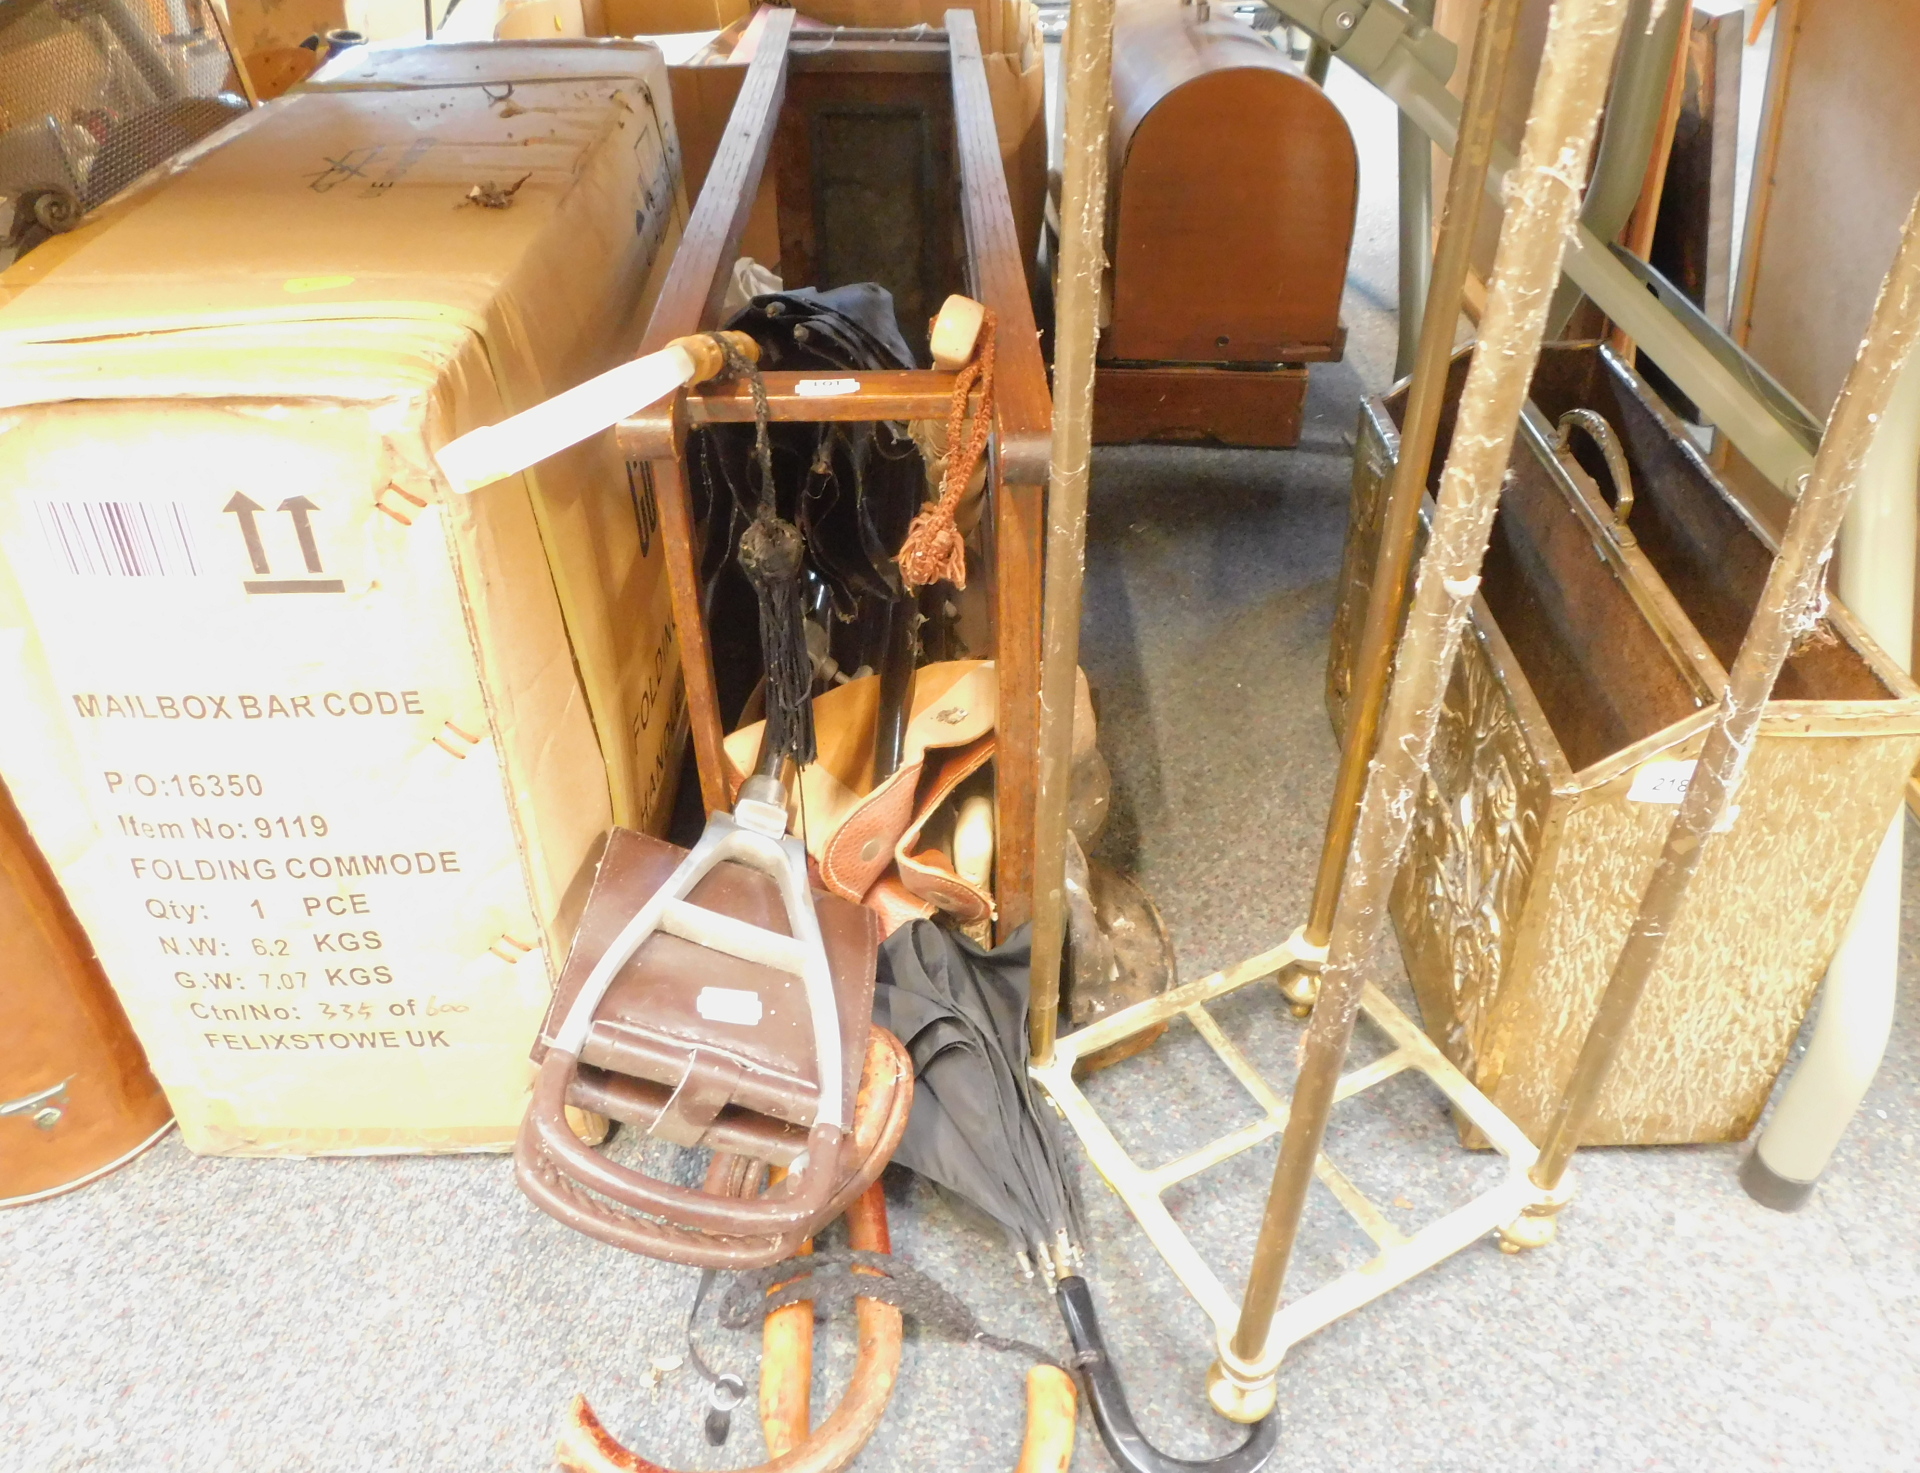 A brass magazine rack, brass plant stand, wooden umbrella stand and various umbrellas and walking st